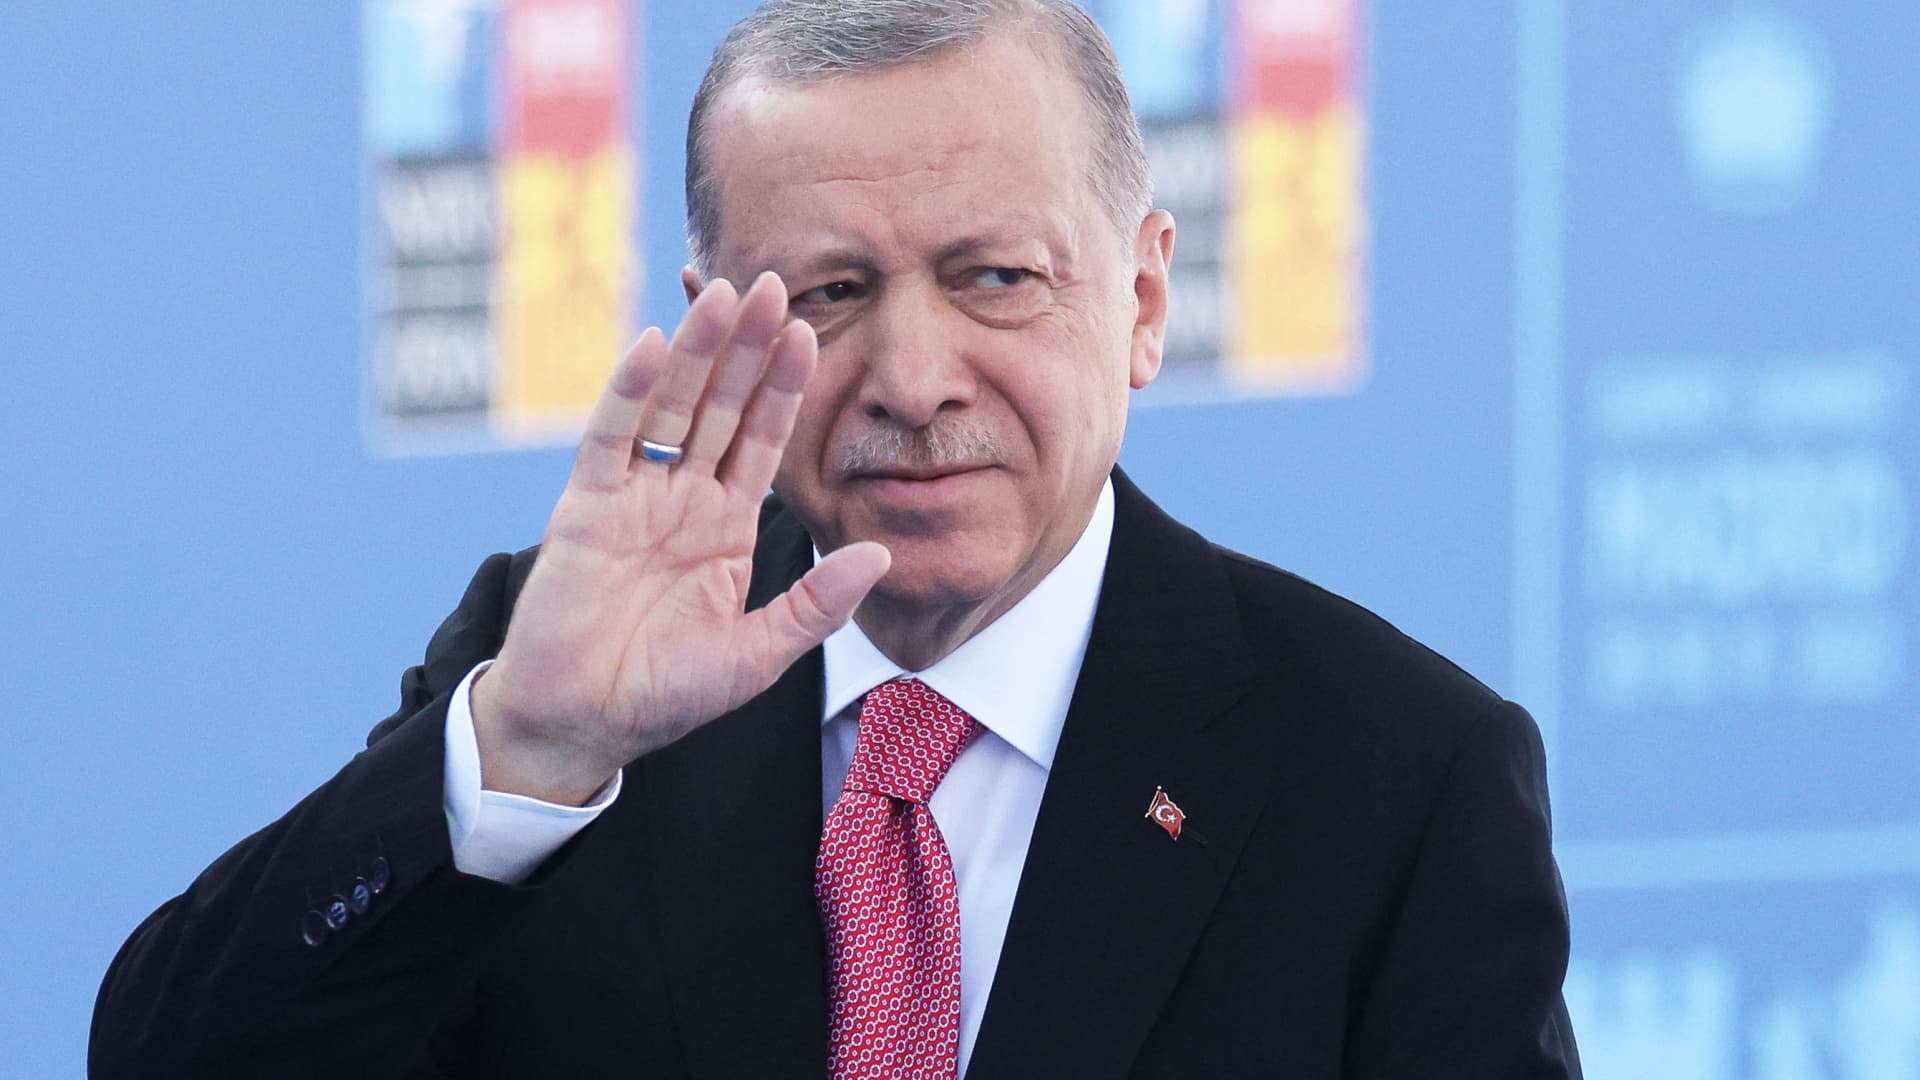 Erdoğan suggests that Turkey could accept Finland’s accession to NATO without Sweden